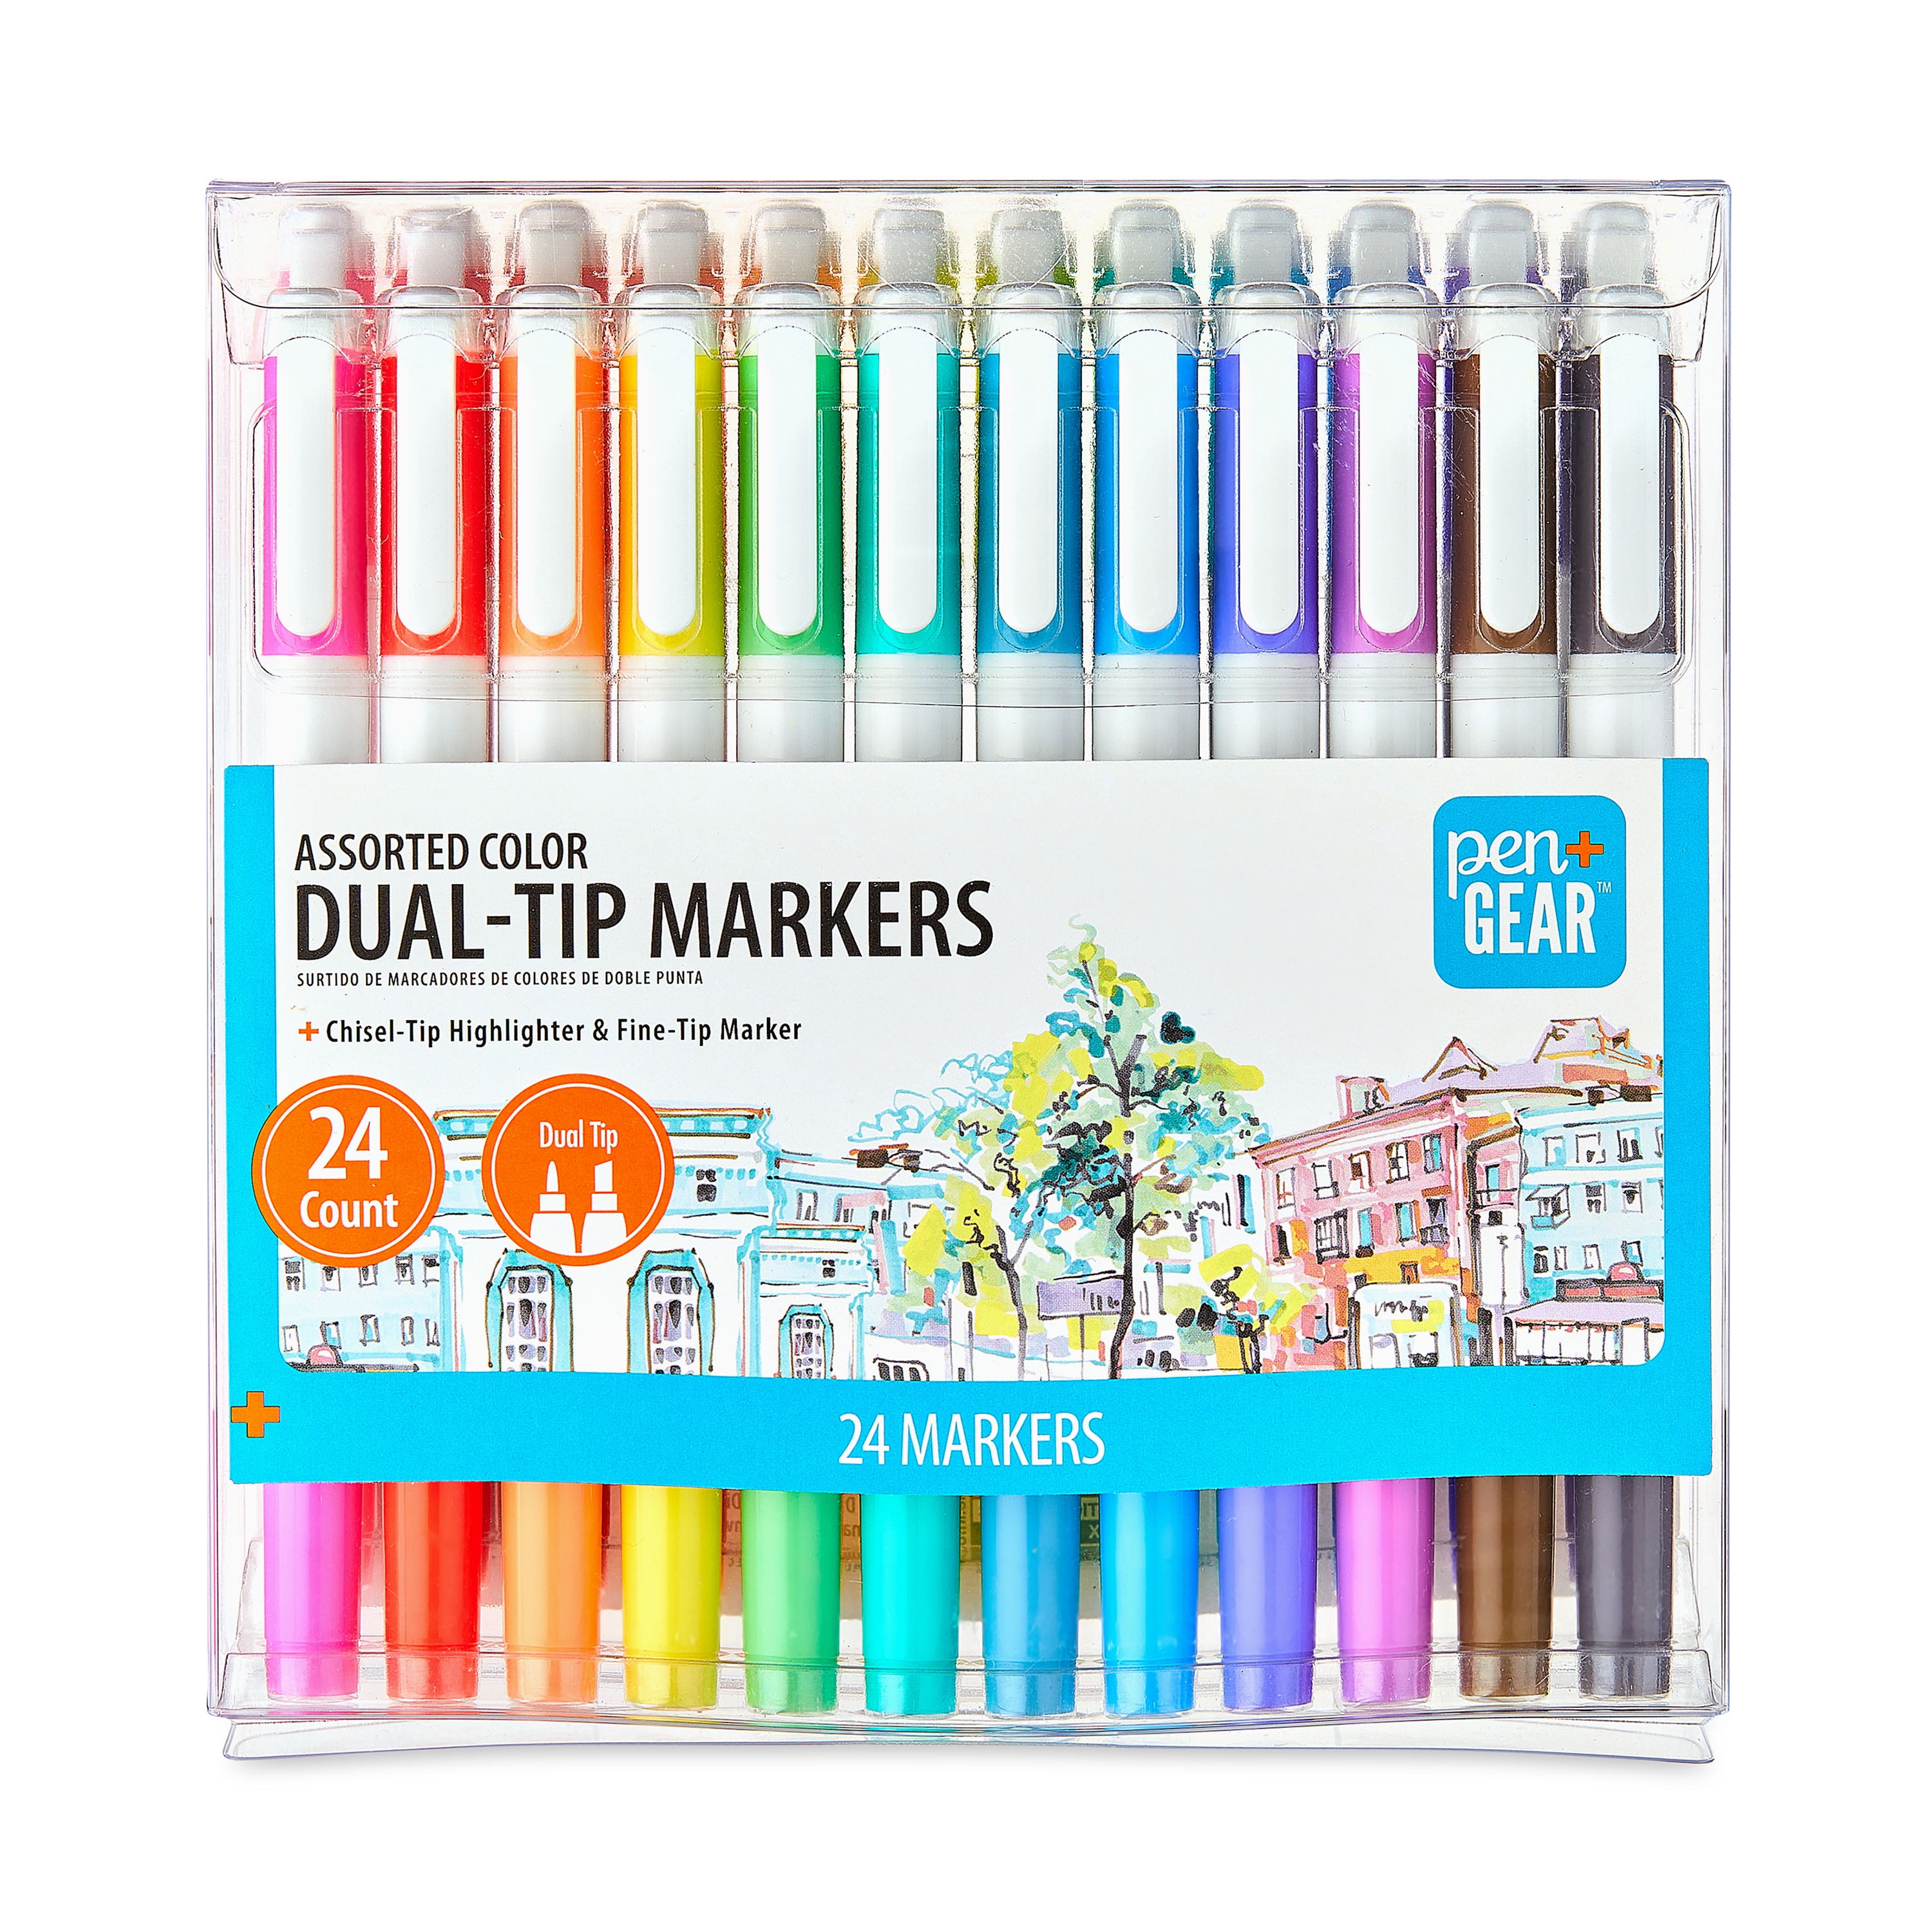 Pen + Gear Dual-Tip Markers, Fine Tip Marker and Chisel Tip Highlighter,  Assorted Colors, 24 Count - DroneUp Delivery